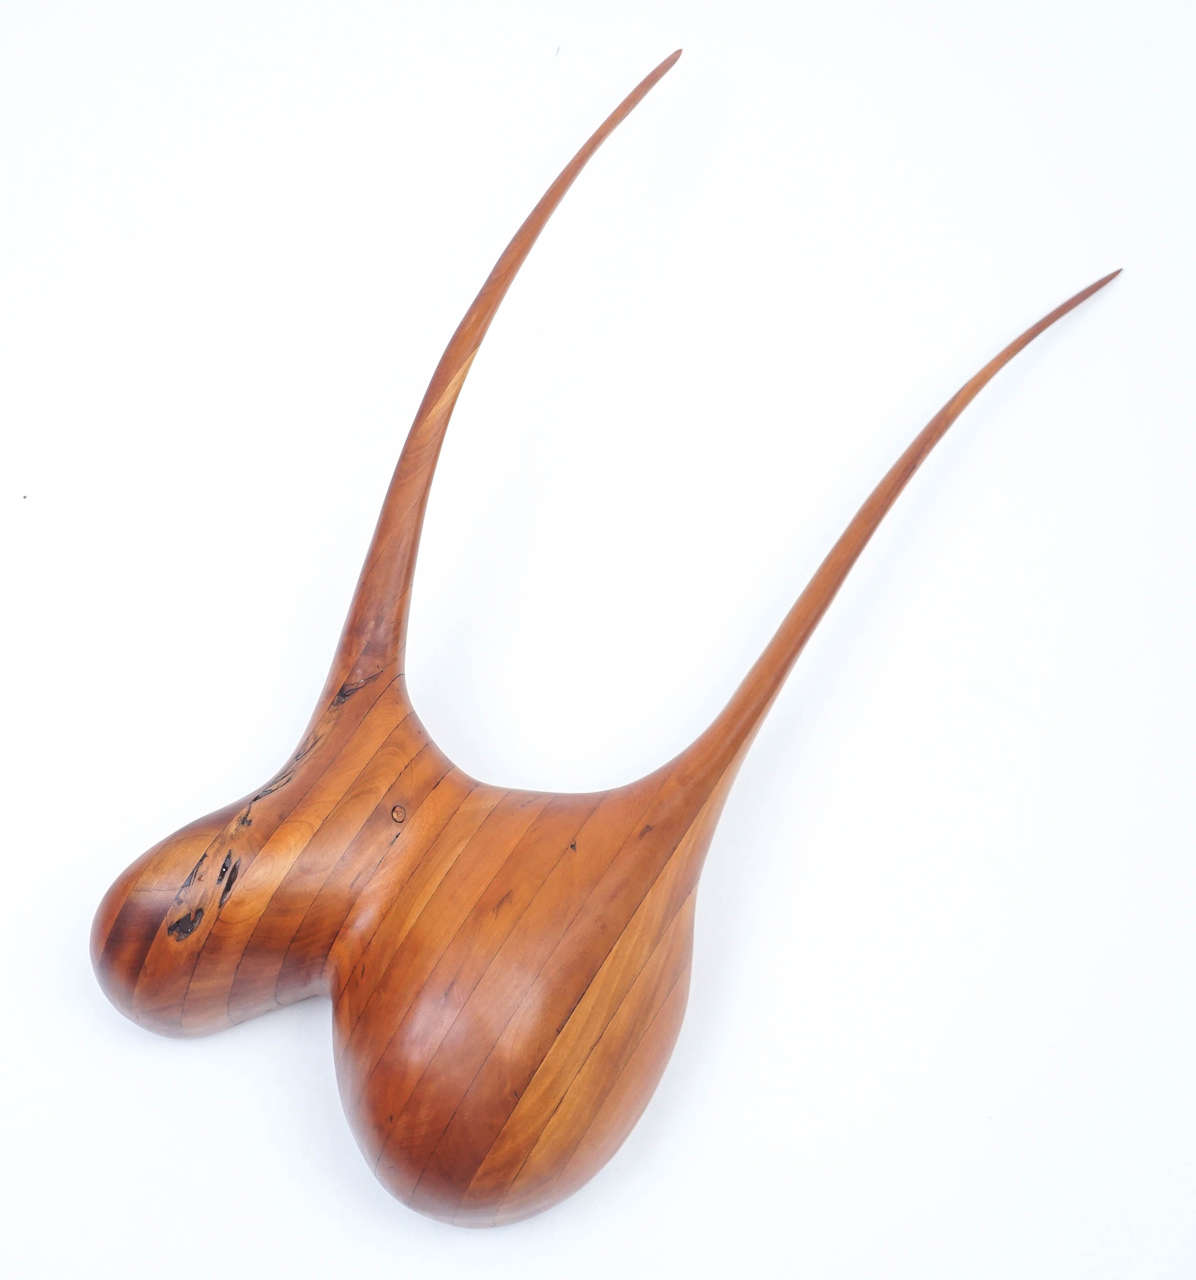 Impressive wood carving in rich cherry suggests the sensual artistry of Wendell Castle. This example is purposefully hung on an angle, its abstract form open to interpretation. The organic design adds depth no beauty to your wall décor.